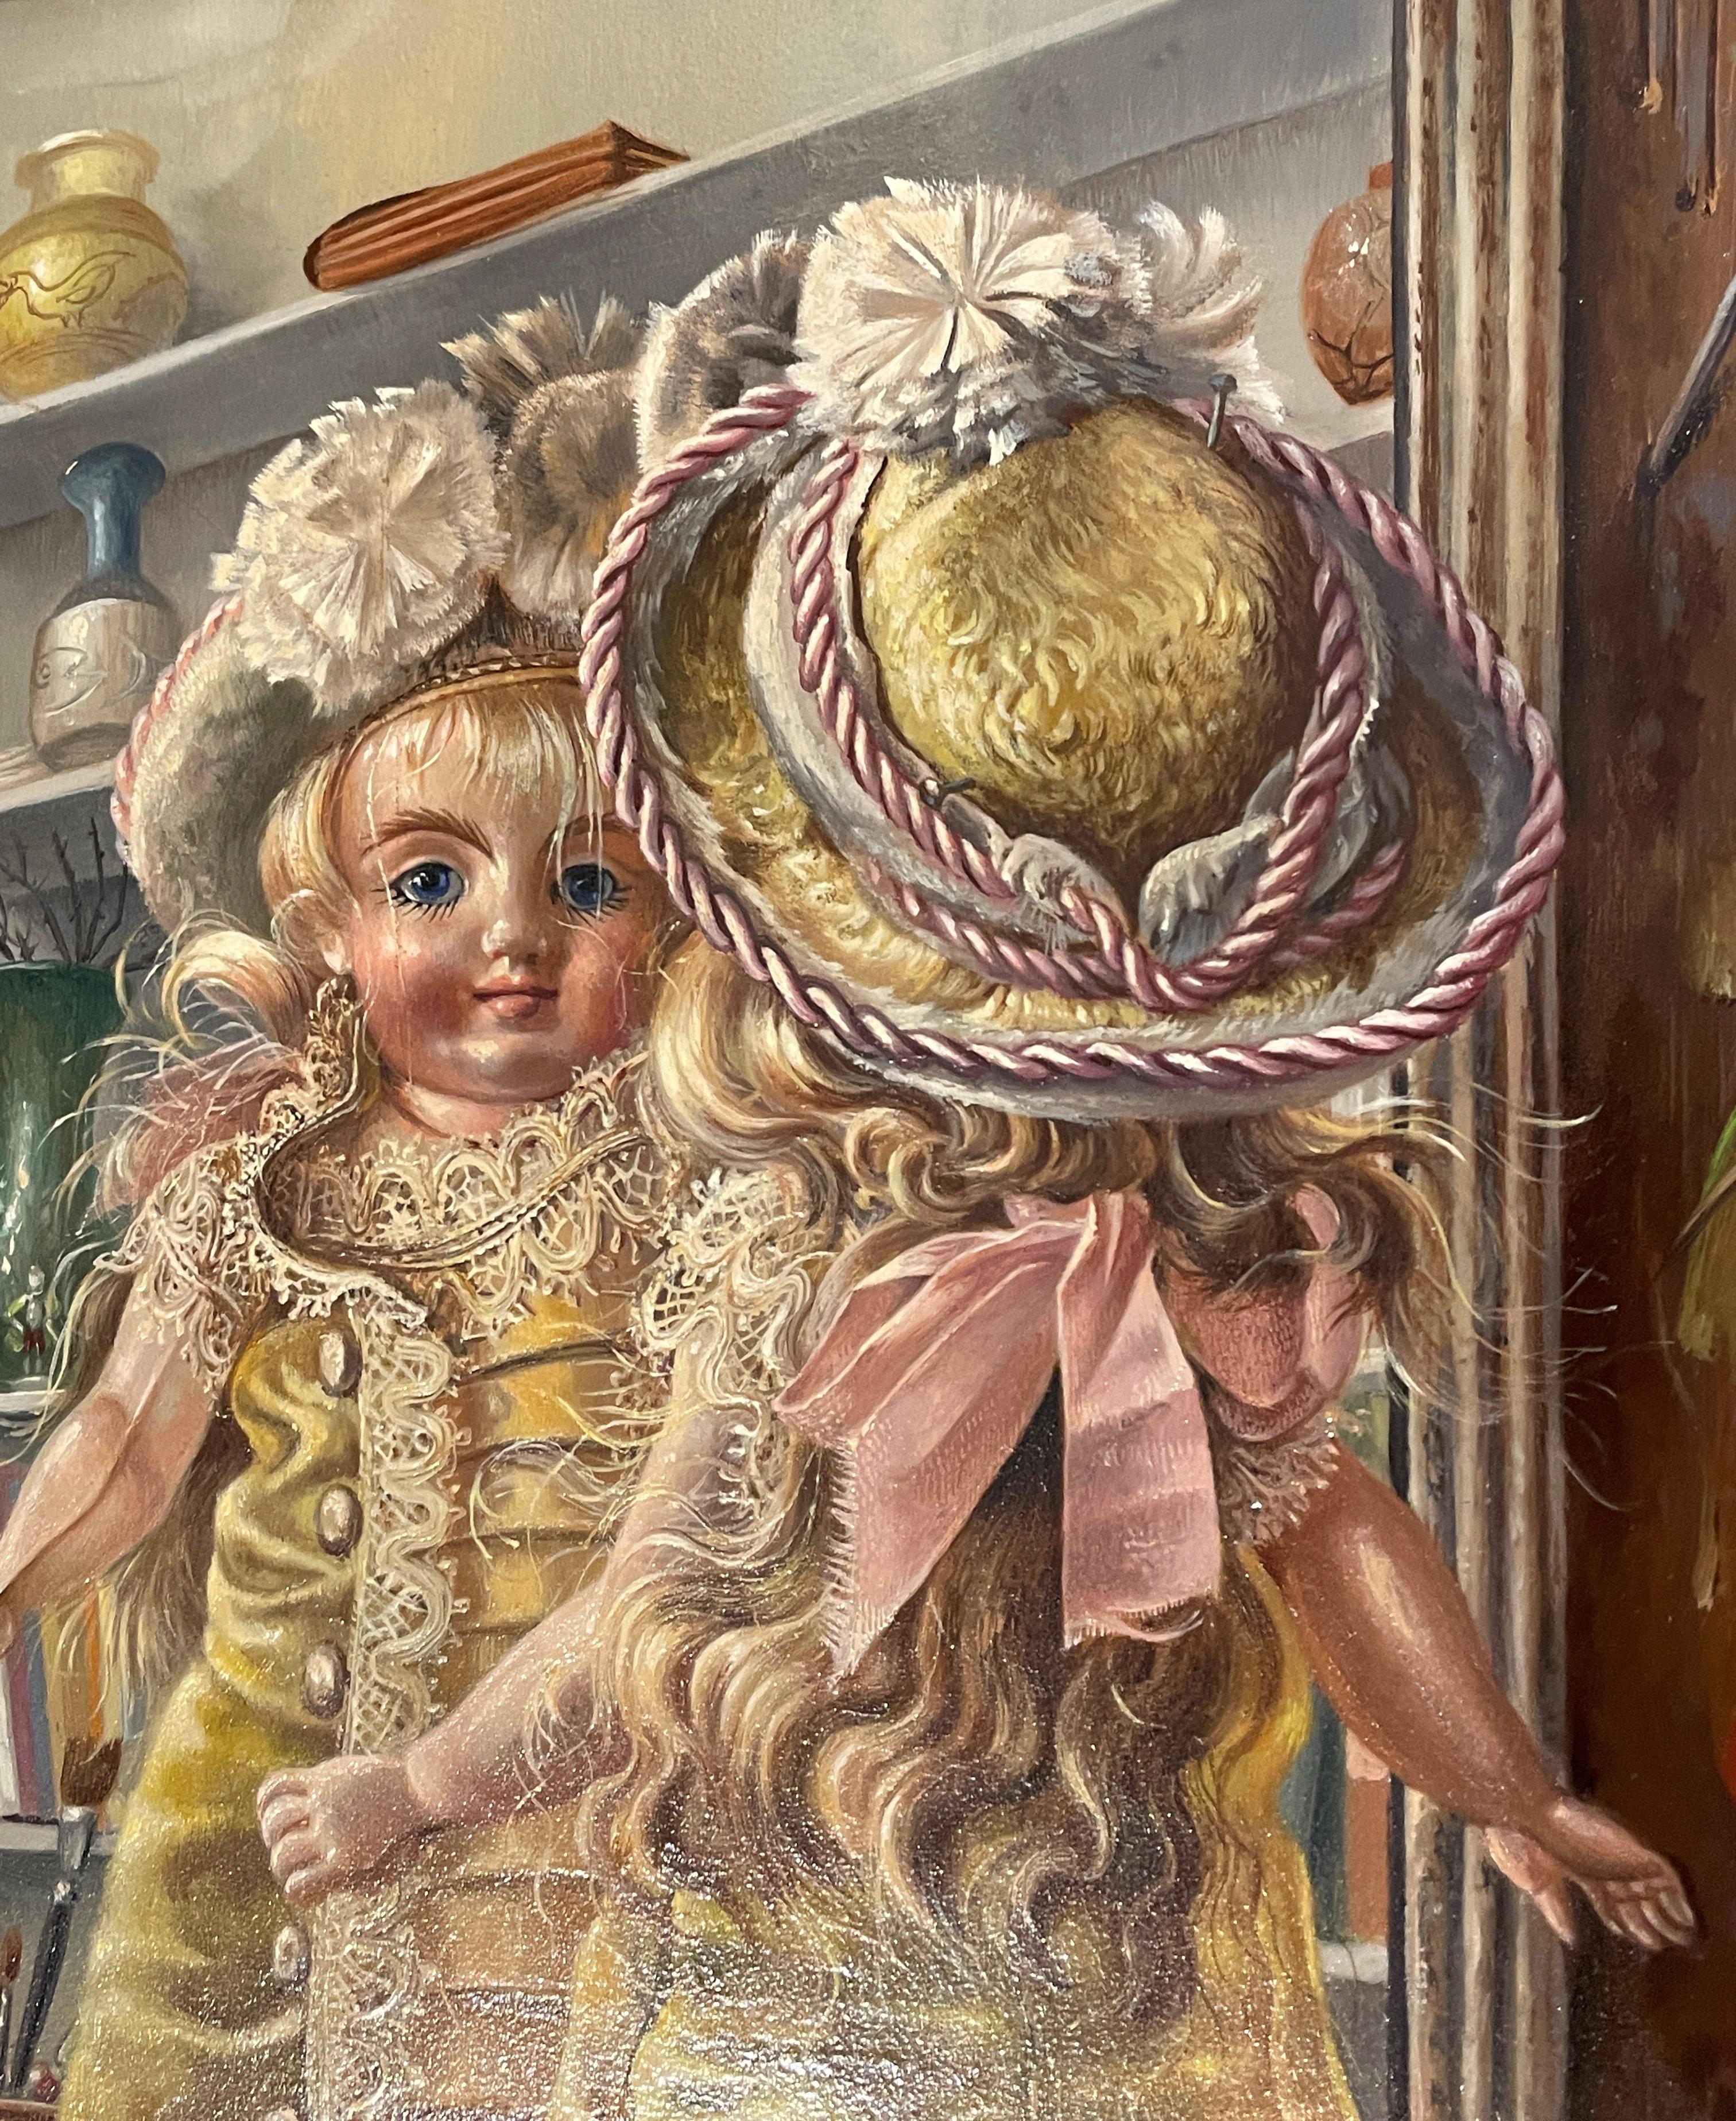 Aaron Bohrod
Doll in Mirror
Signed lower left
Oil on gesso board
10 1/2 x 8 1/2 inches

Provenance:
The artist
Hammer Galleries, New York
Private Collection, West Bloomfield, Michigan

Known for a range of work in watercolor and gouache that